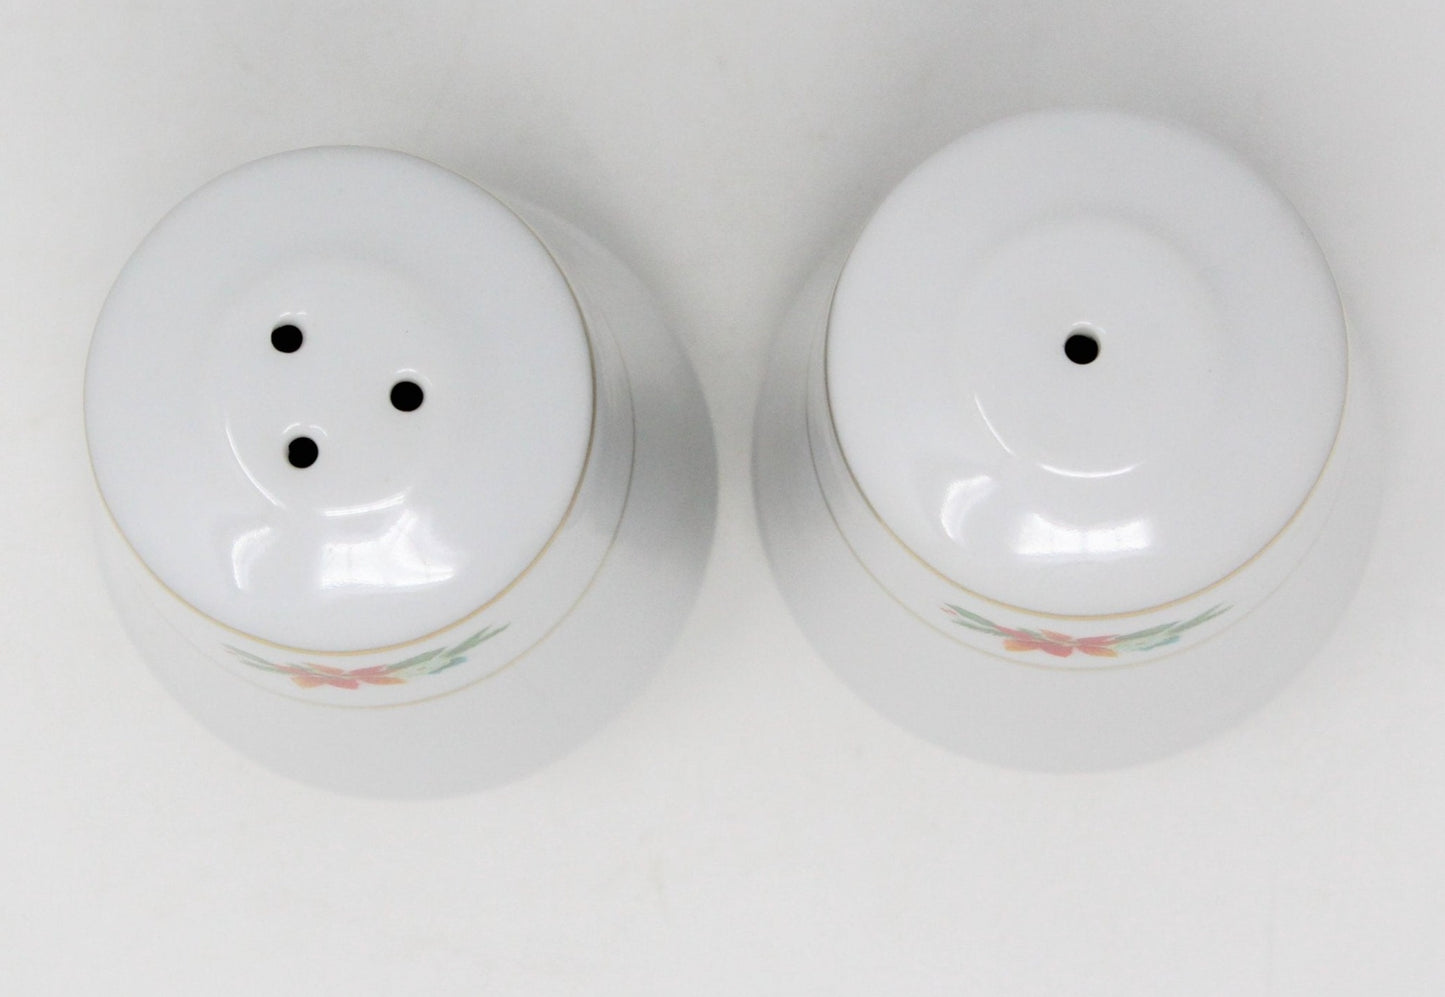 Salt and Pepper Shakers, Royal Norfolk, Poinsettia and Holly, RNF26 Porcelain, 2004